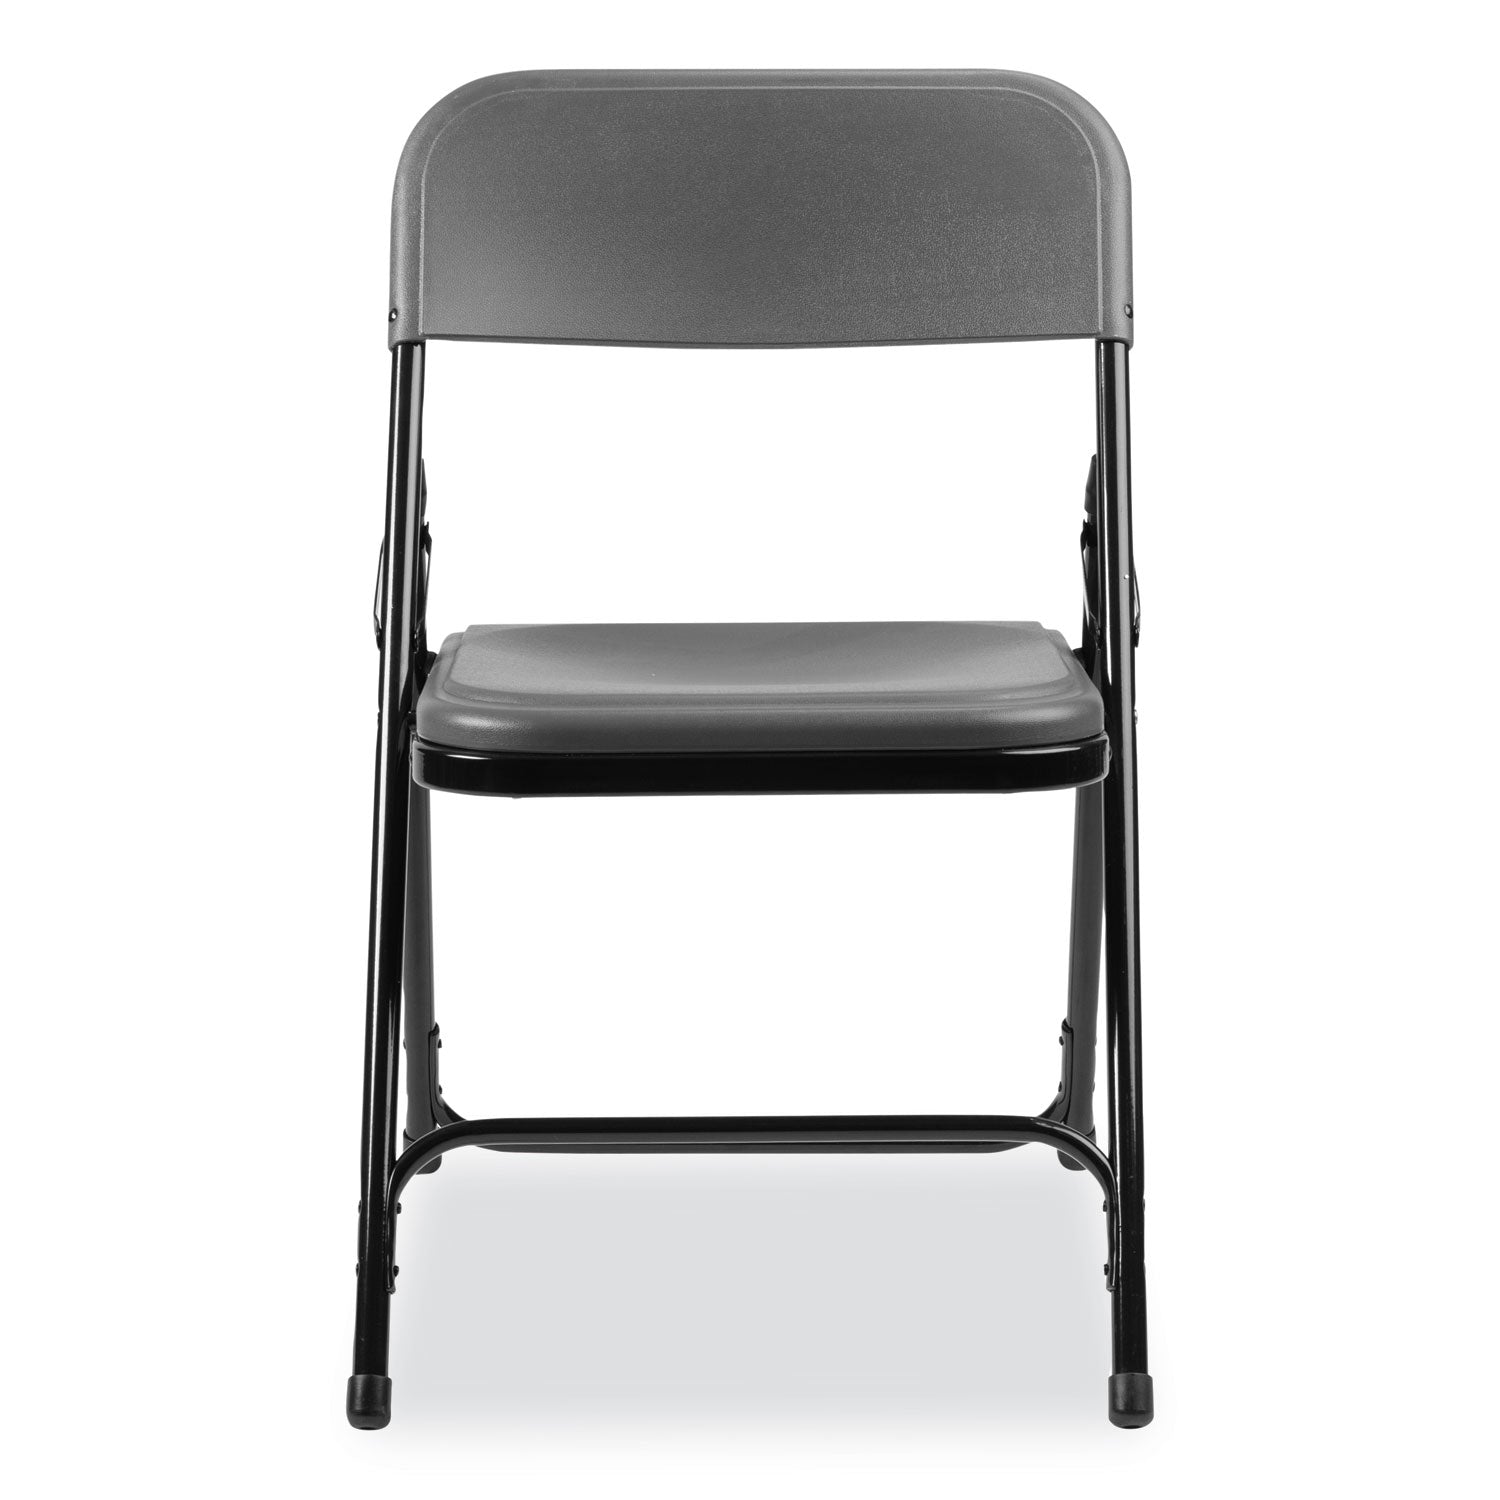 800-series-plastic-folding-chair-supports-500-lb-18-seat-ht-charcoal-seat-back-black-base-4-ct-ships-in-1-3-bus-days_nps820 - 3